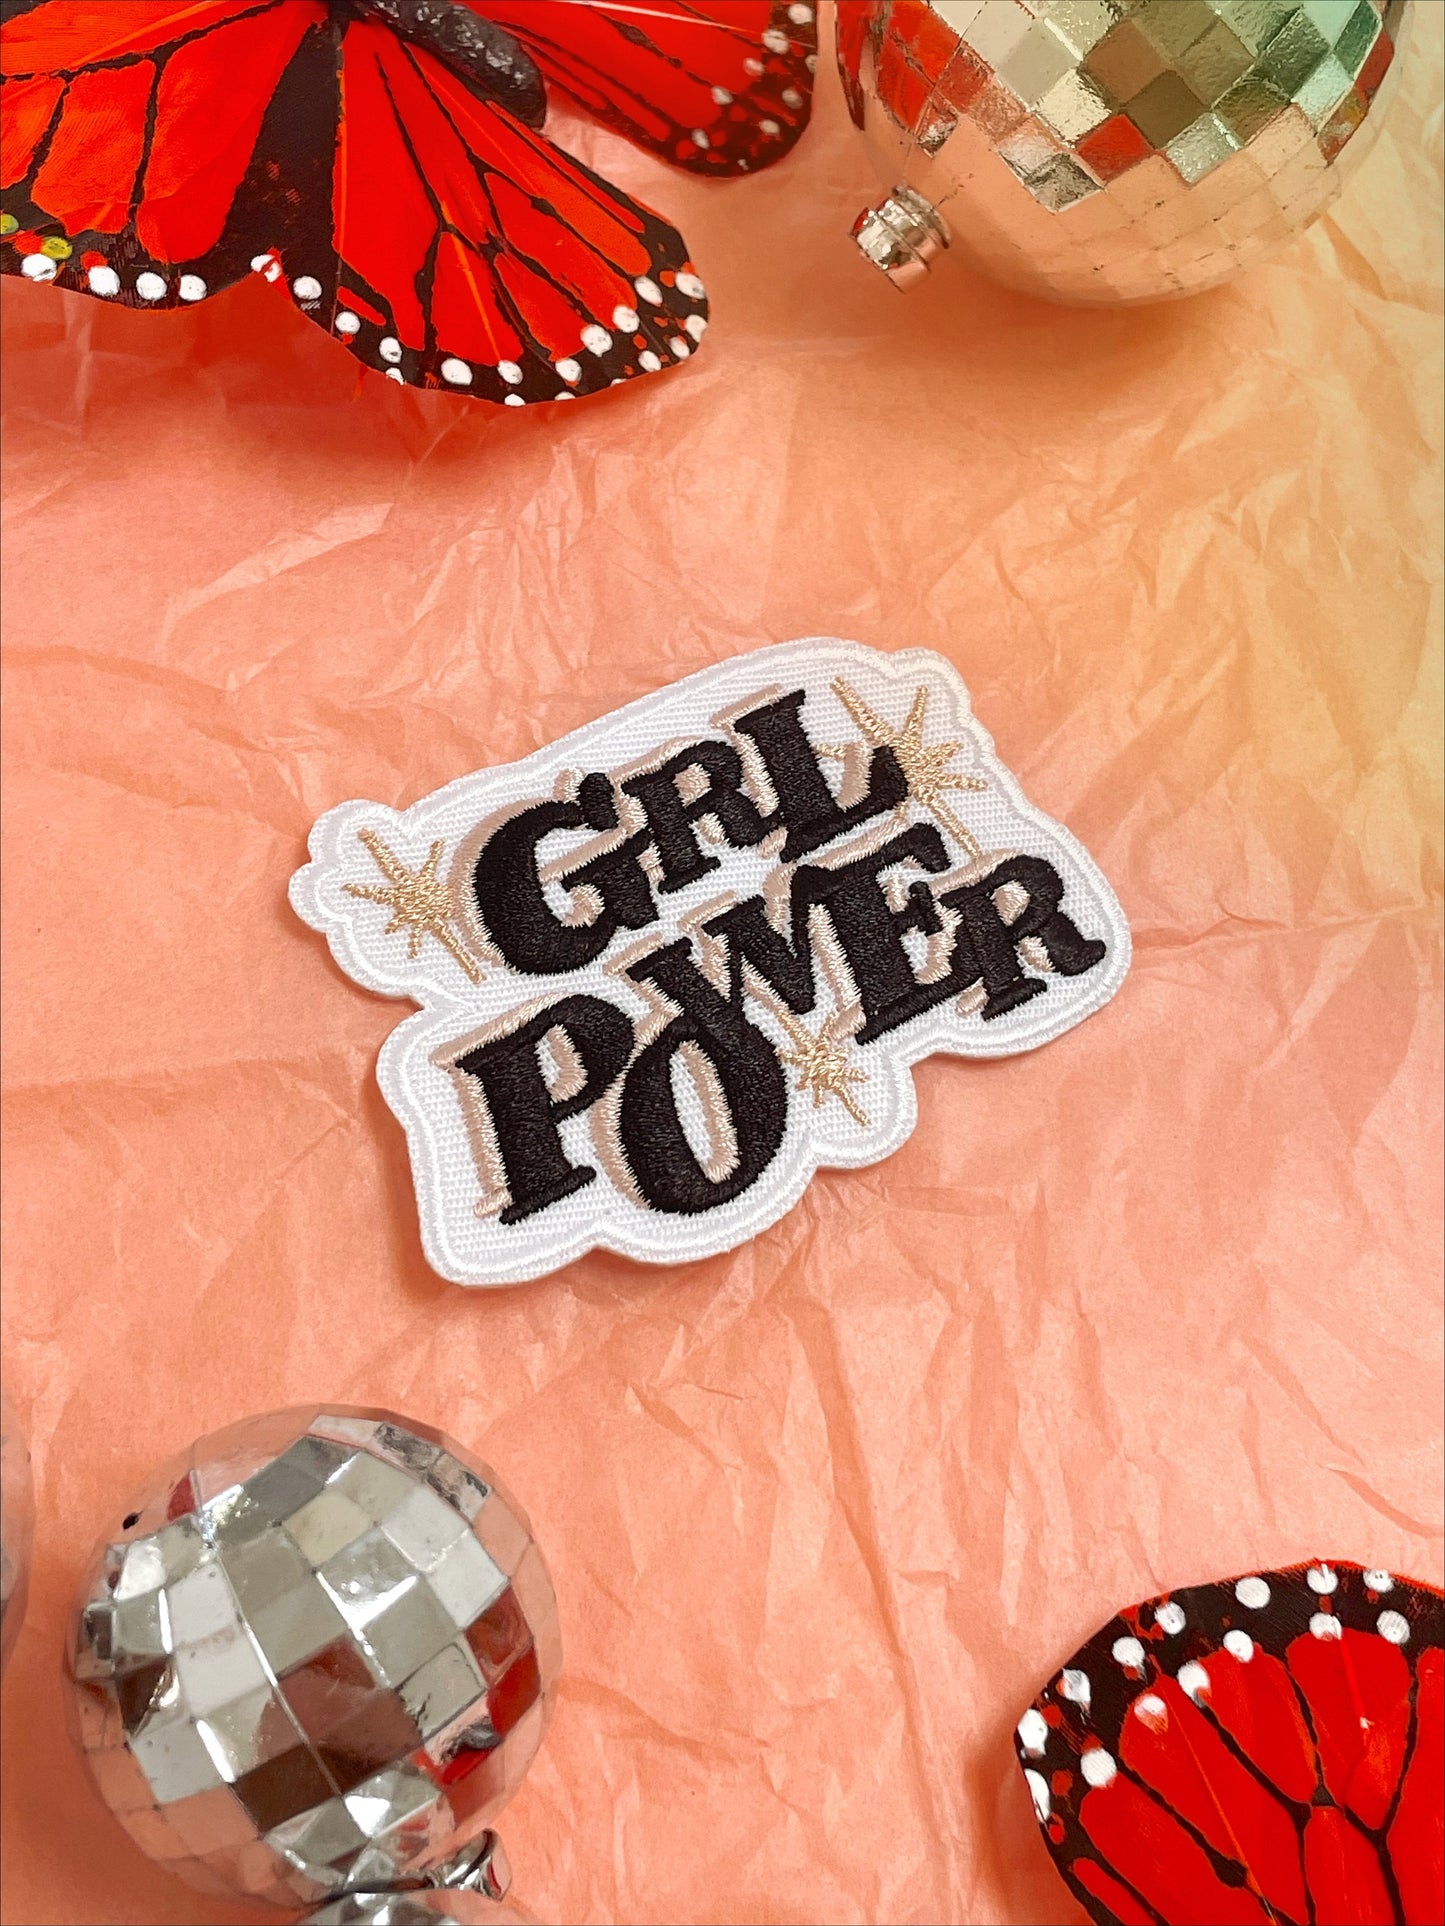 GRL POWER Iron-On Patch